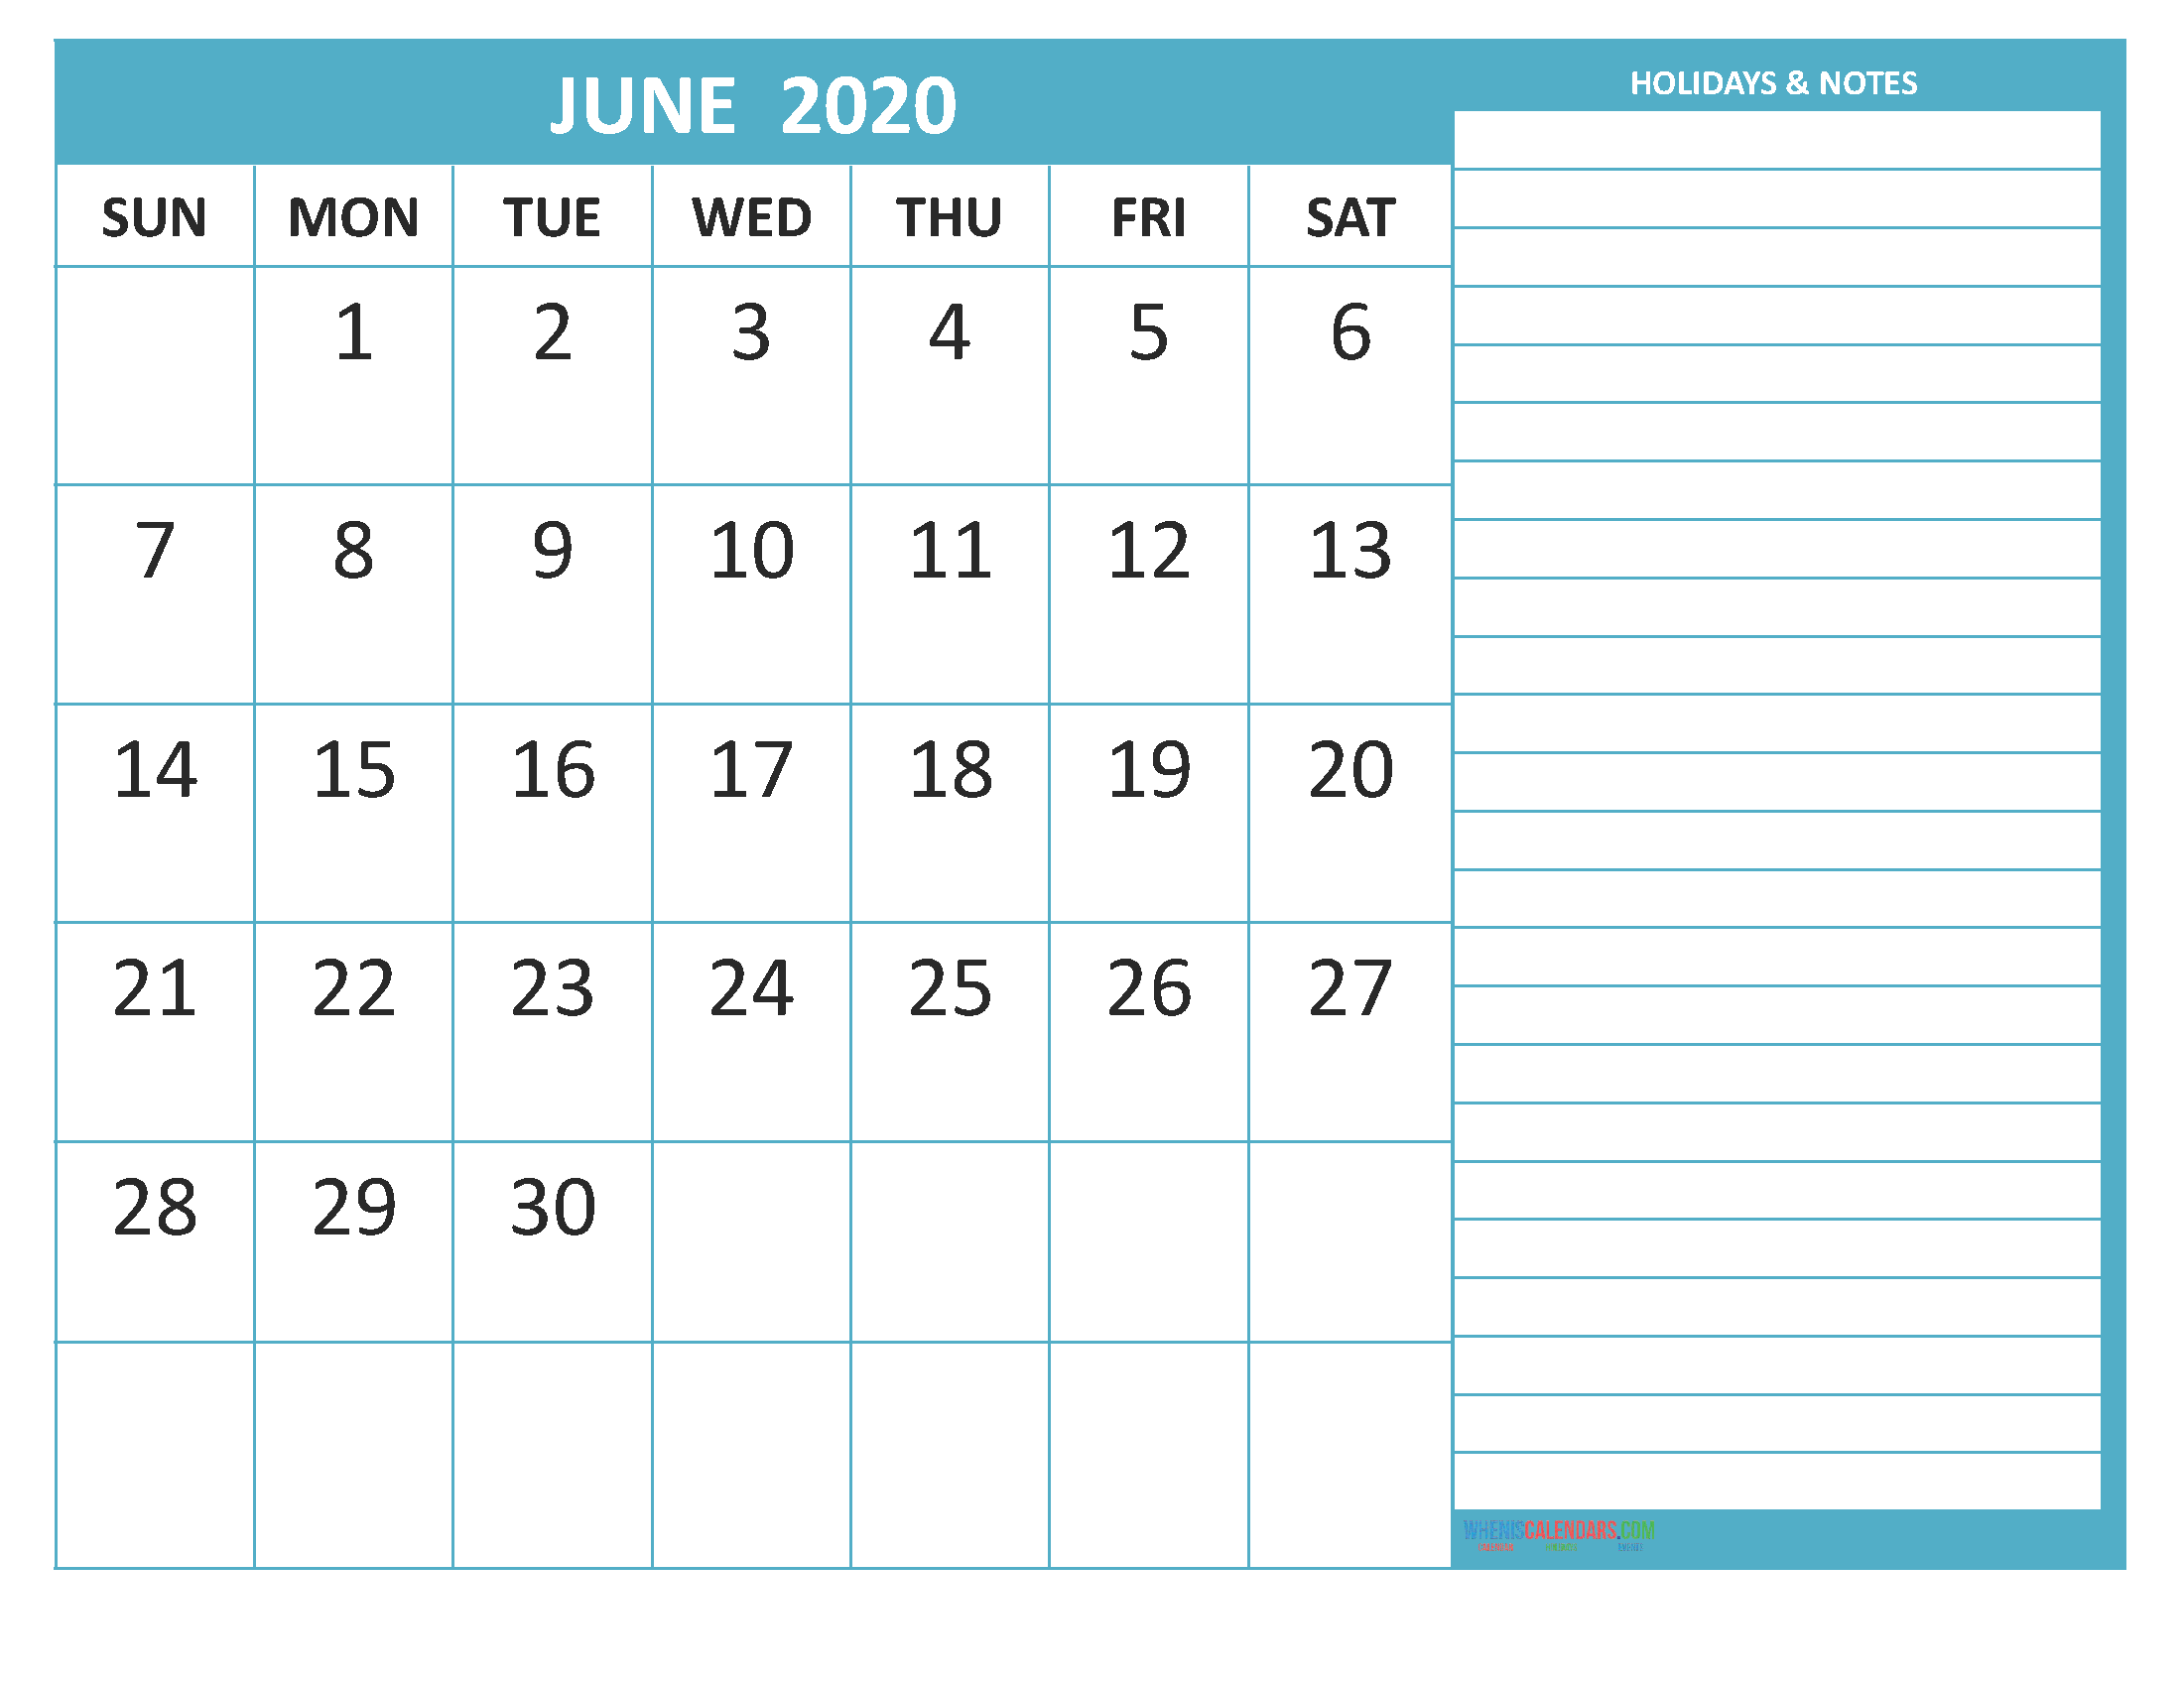 Free Printable Monthly Calendar 2020 June with Holidays